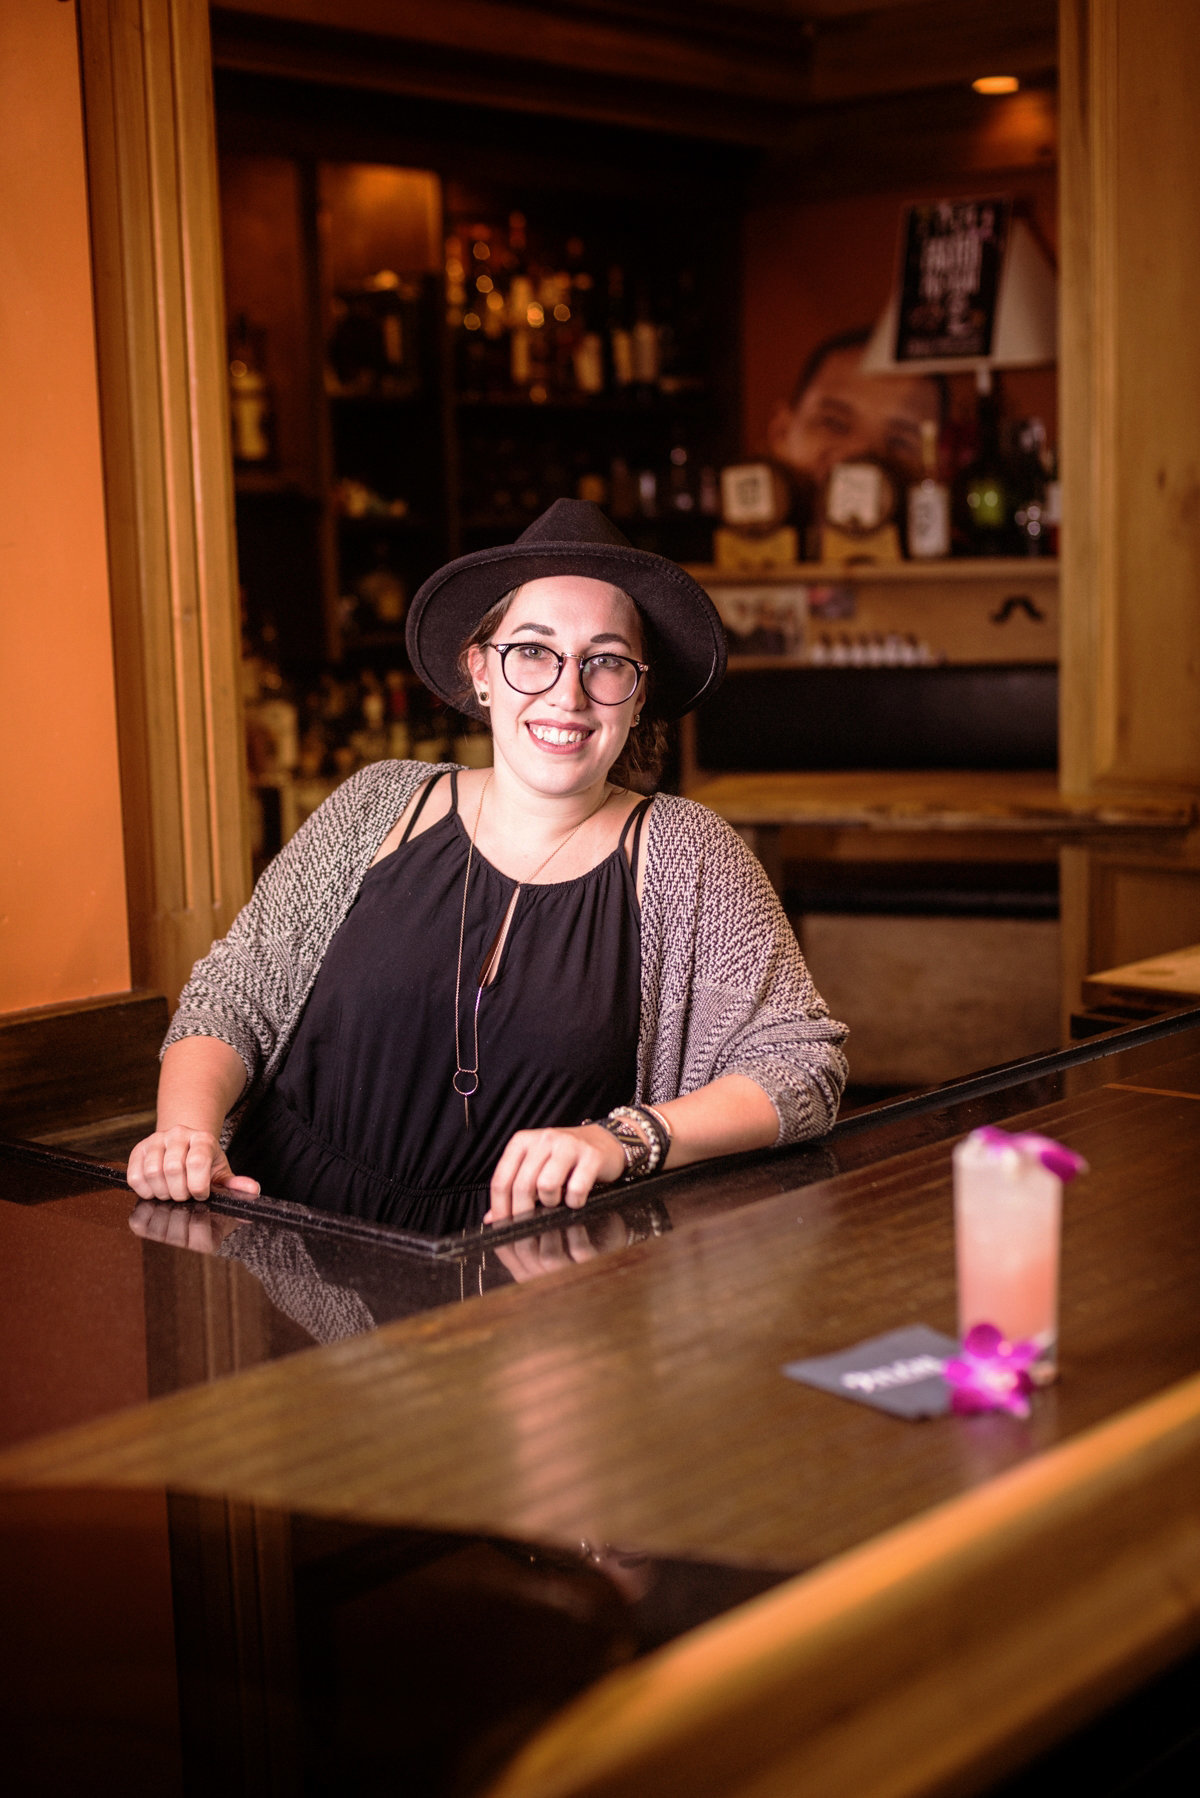 Advertising portrait photograph of a bartender in a hip bar